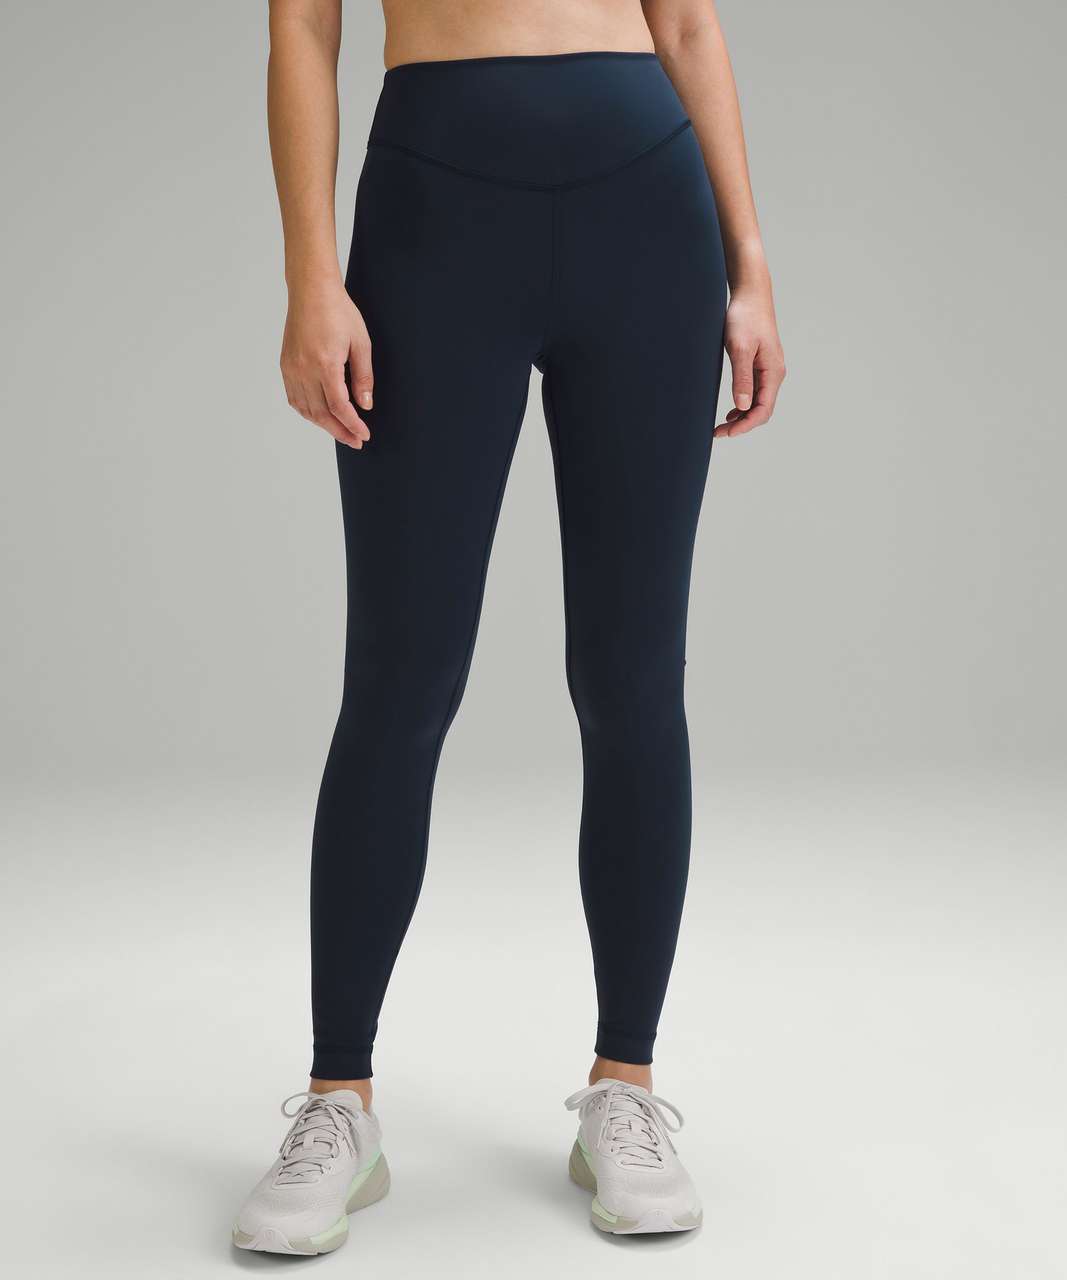 Lululemon Wunder Under SmoothCover High-Rise Tight 28" - True Navy